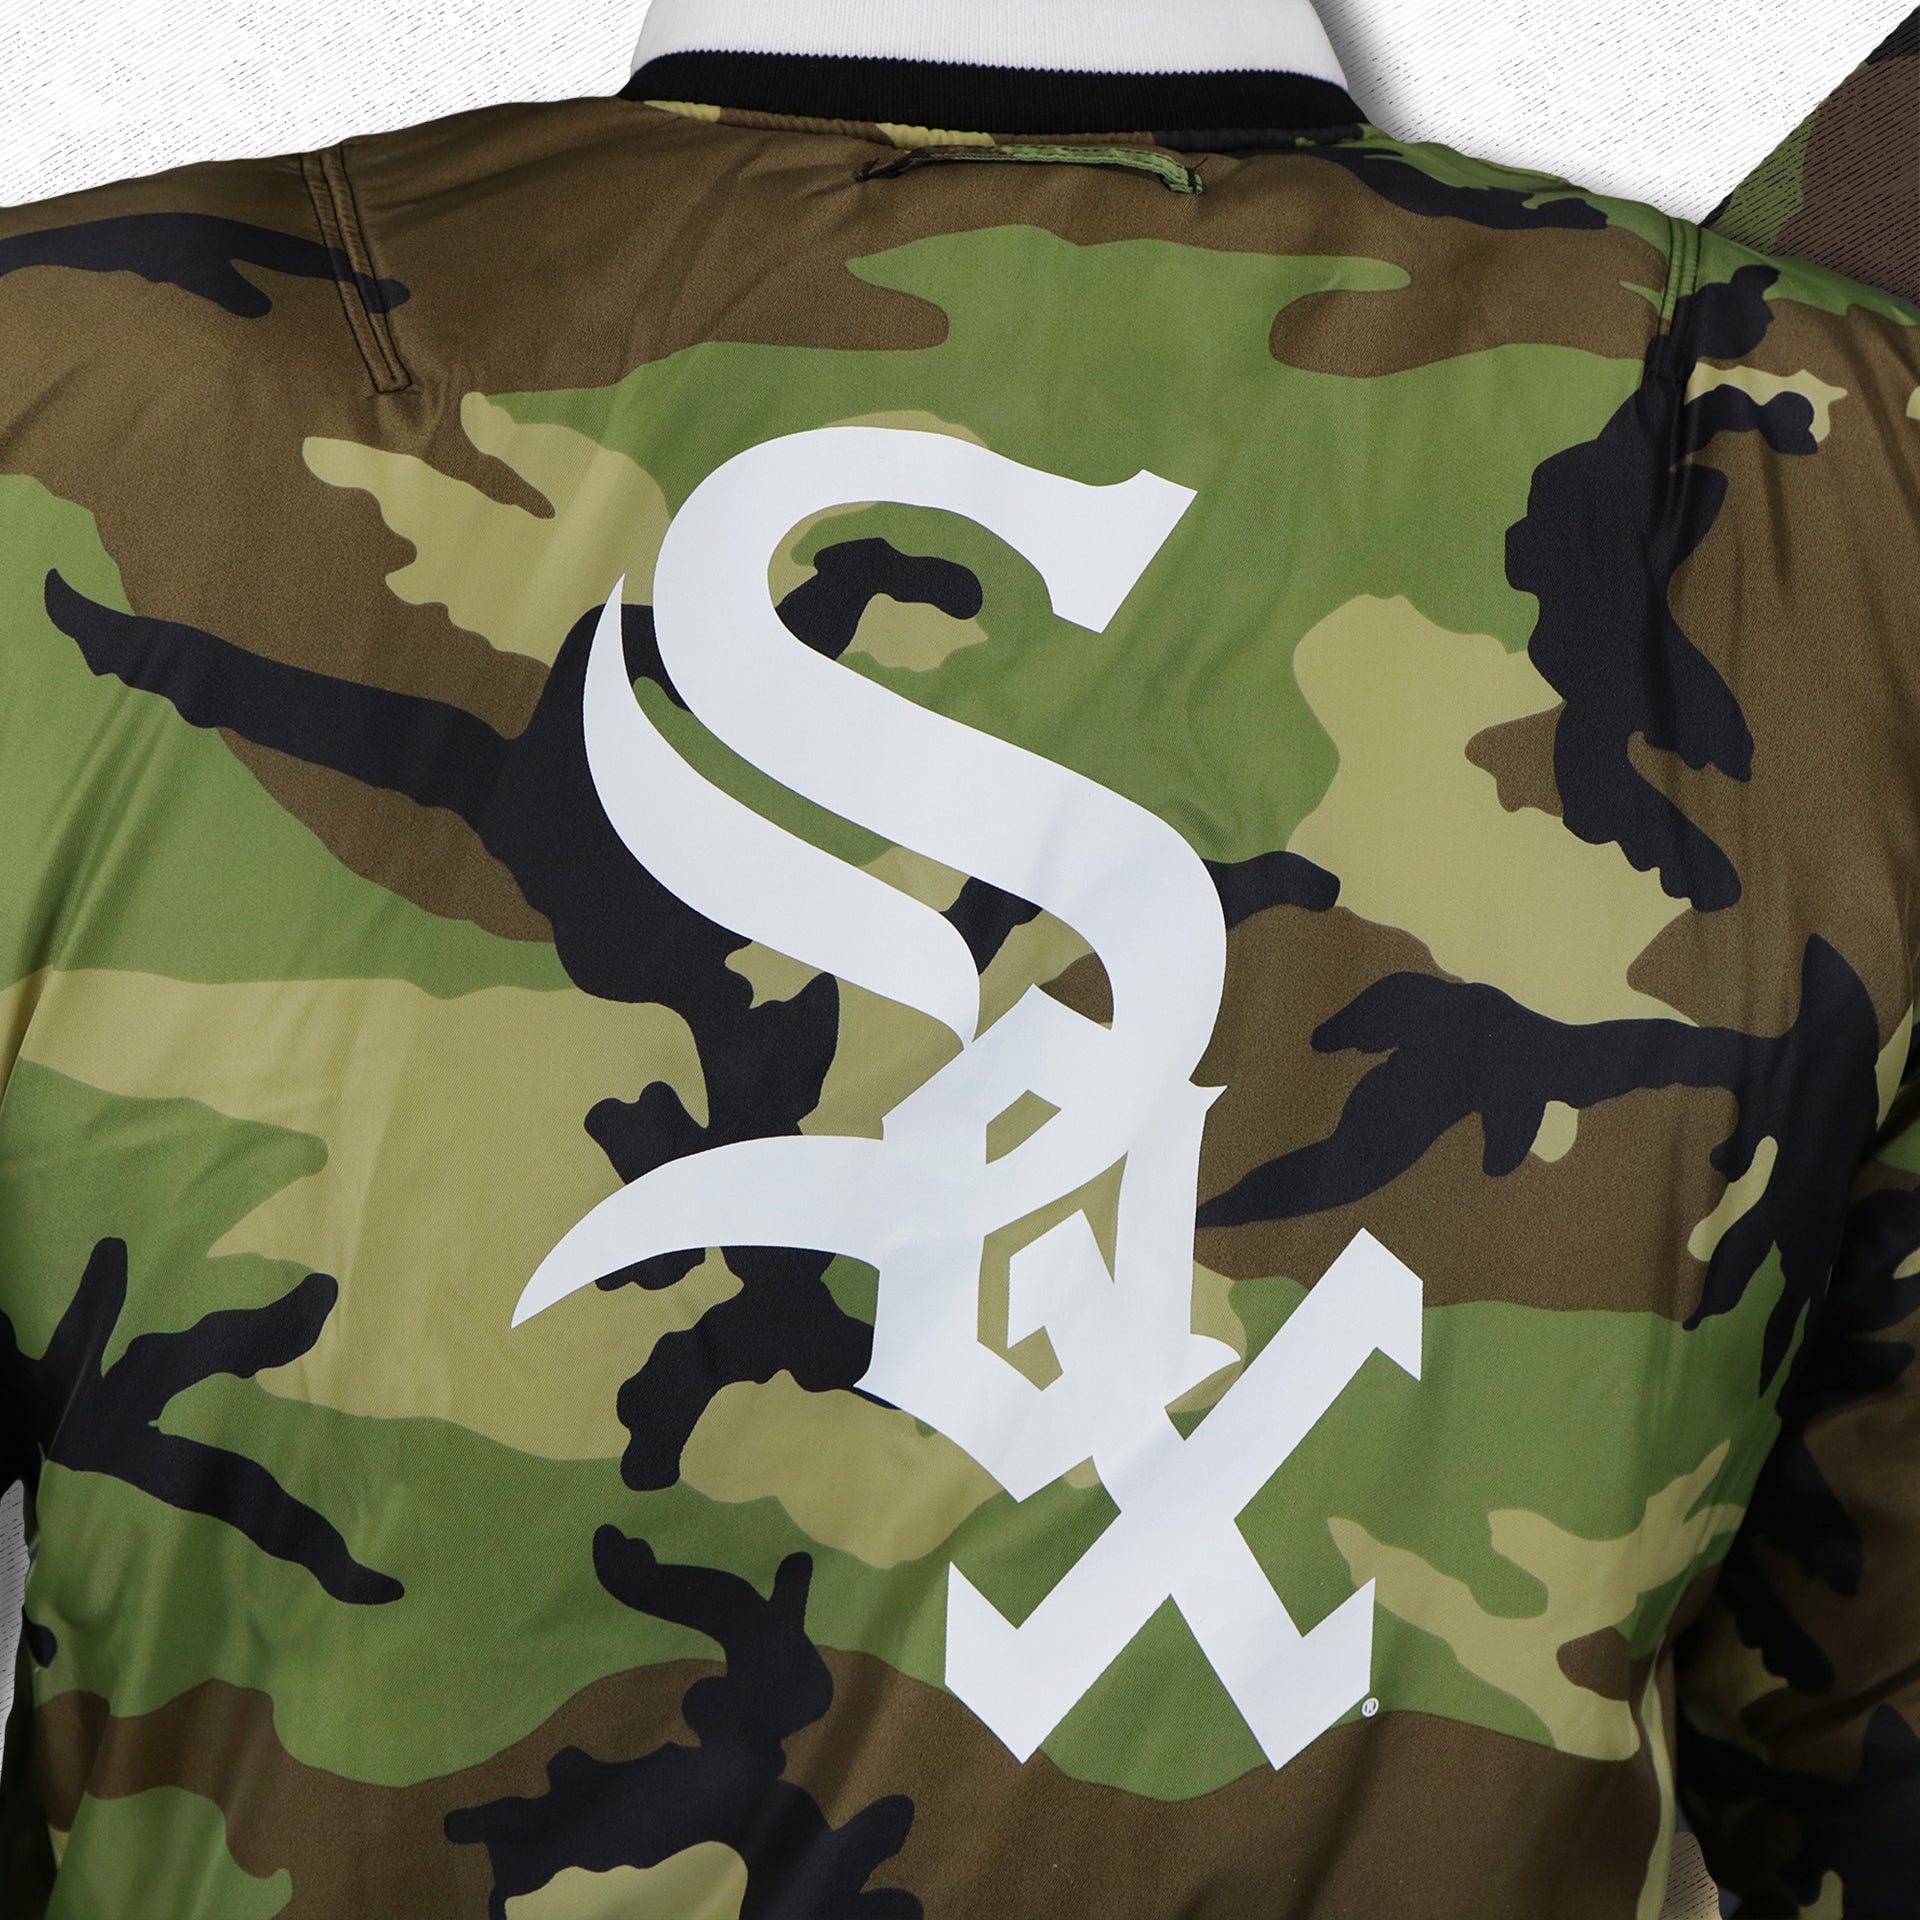 The White Sox Logo on the Chicago White Sox MLB Patch Alpha Industries Reversible Bomber Jacket With Camo Liner | Black Bomber Jacket